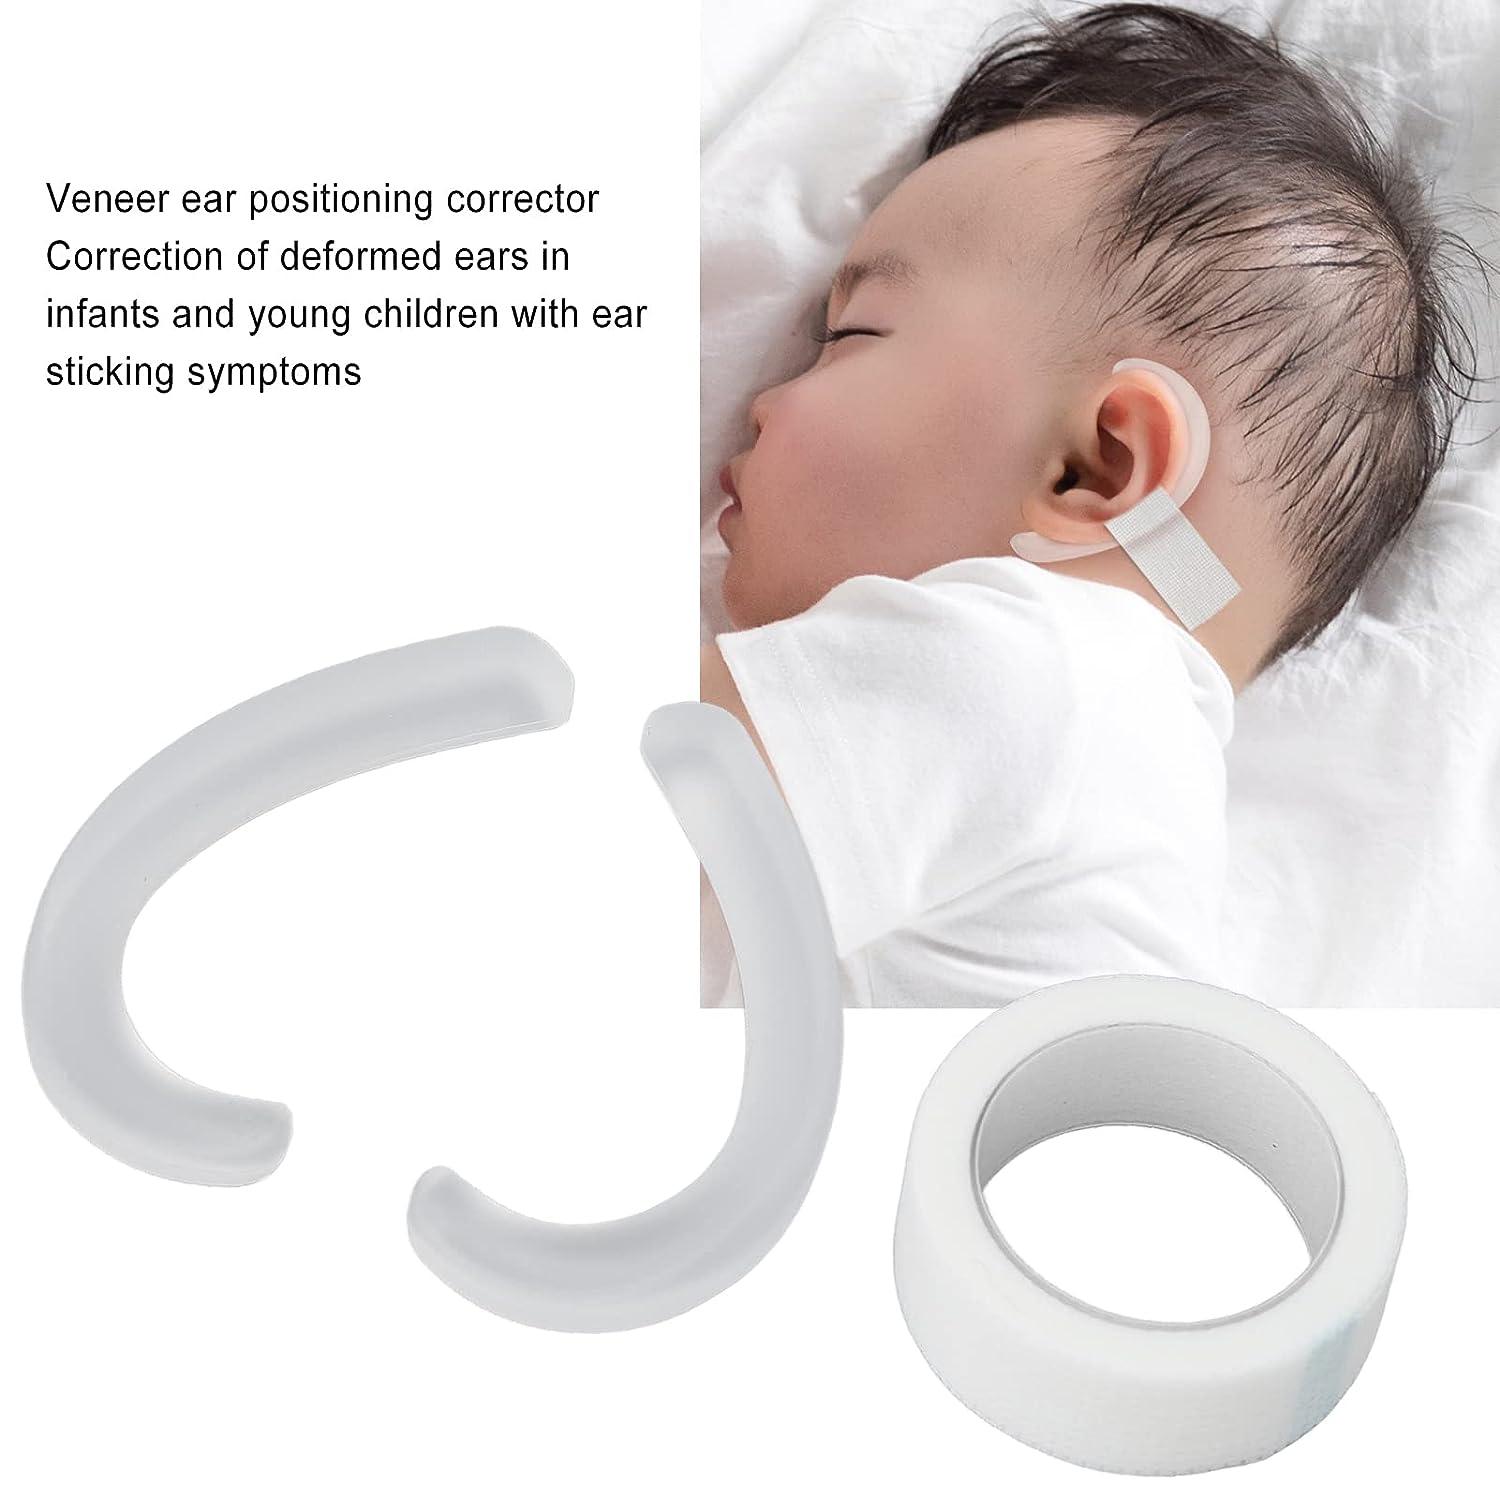 Should parents of babies with sticky-out ears really buy these Spanish  correctors?